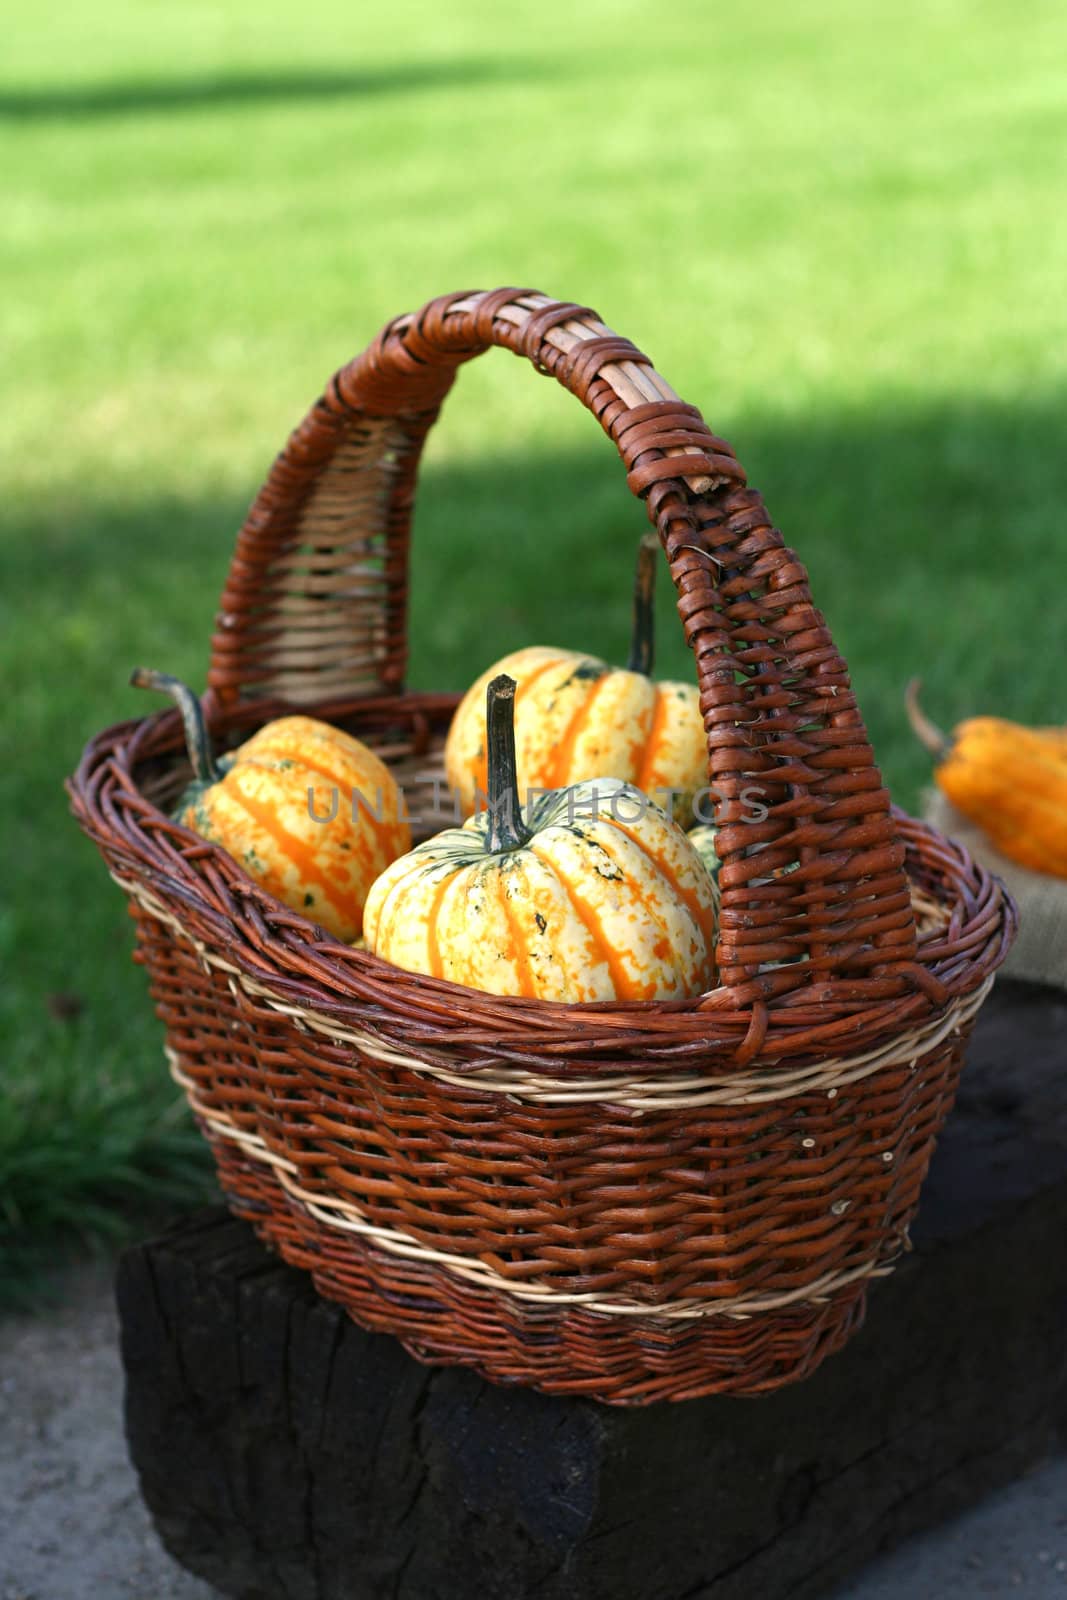 Pumpkins still-life with natural background